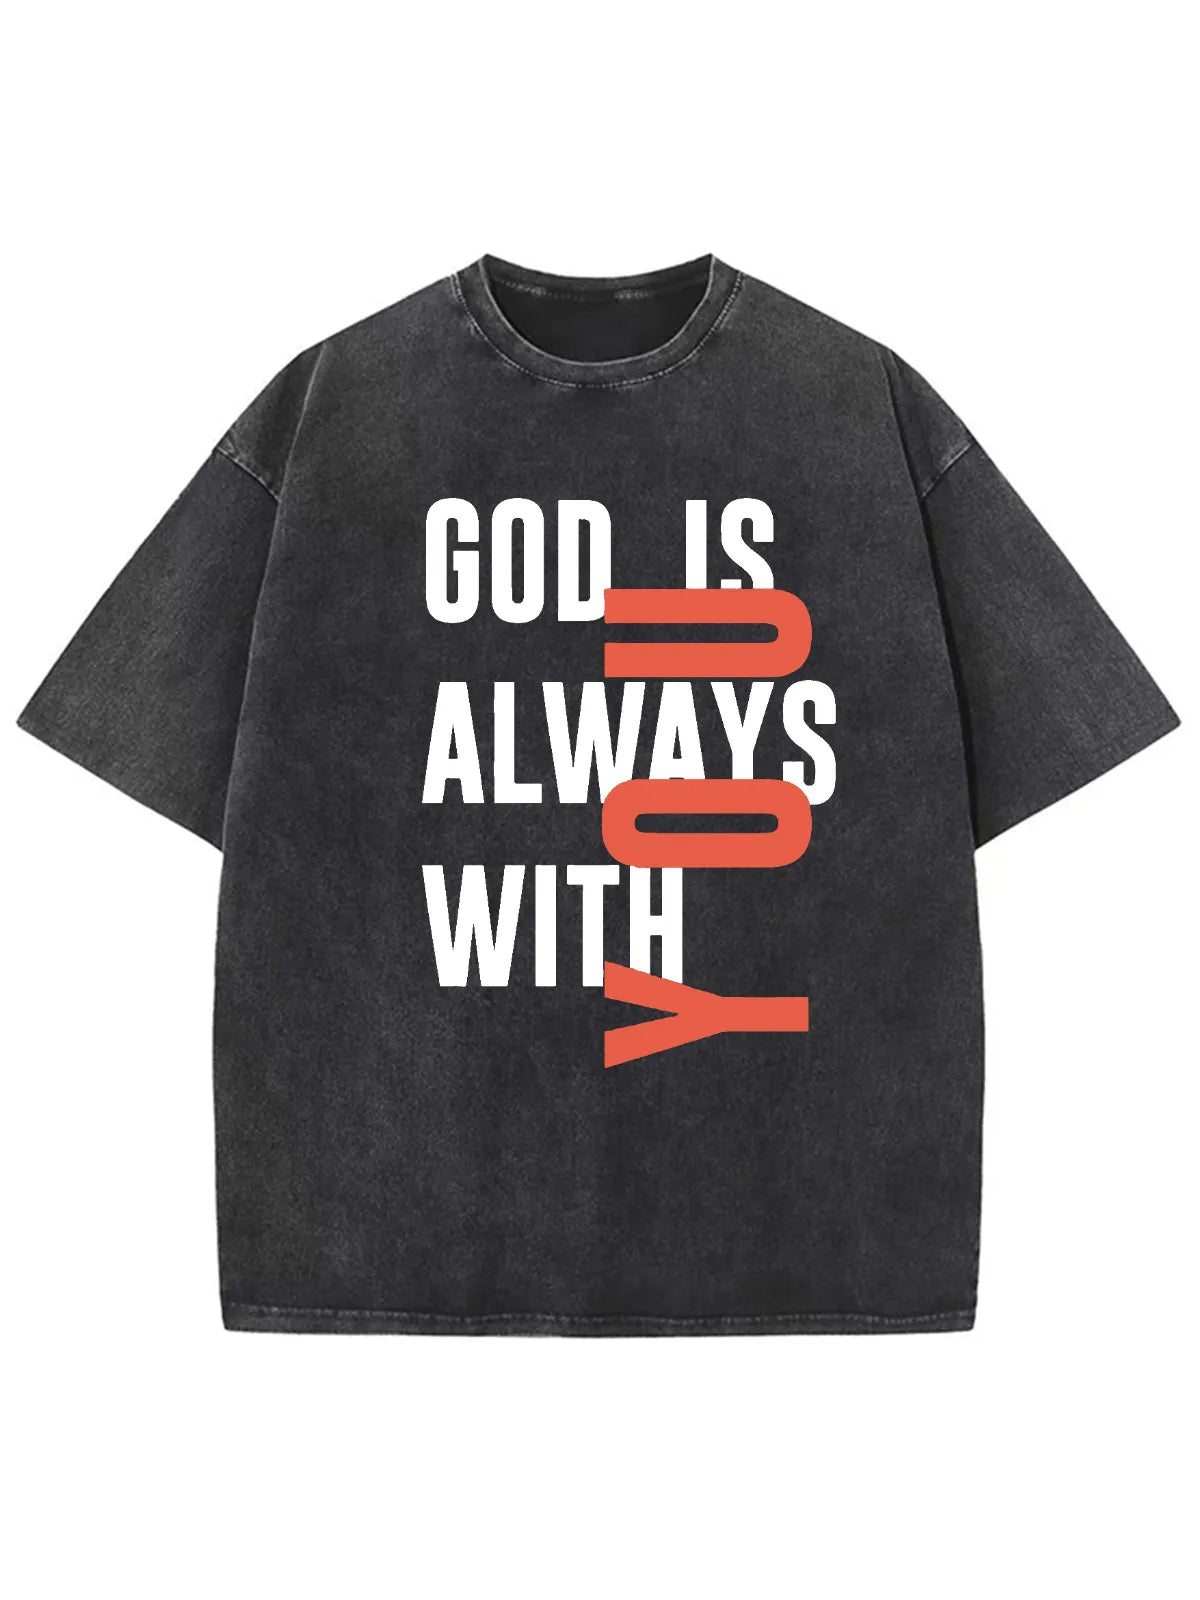 God Is Always With Printed Washed Cotton Men's Short-Sleeved Round Neck T-Shirt